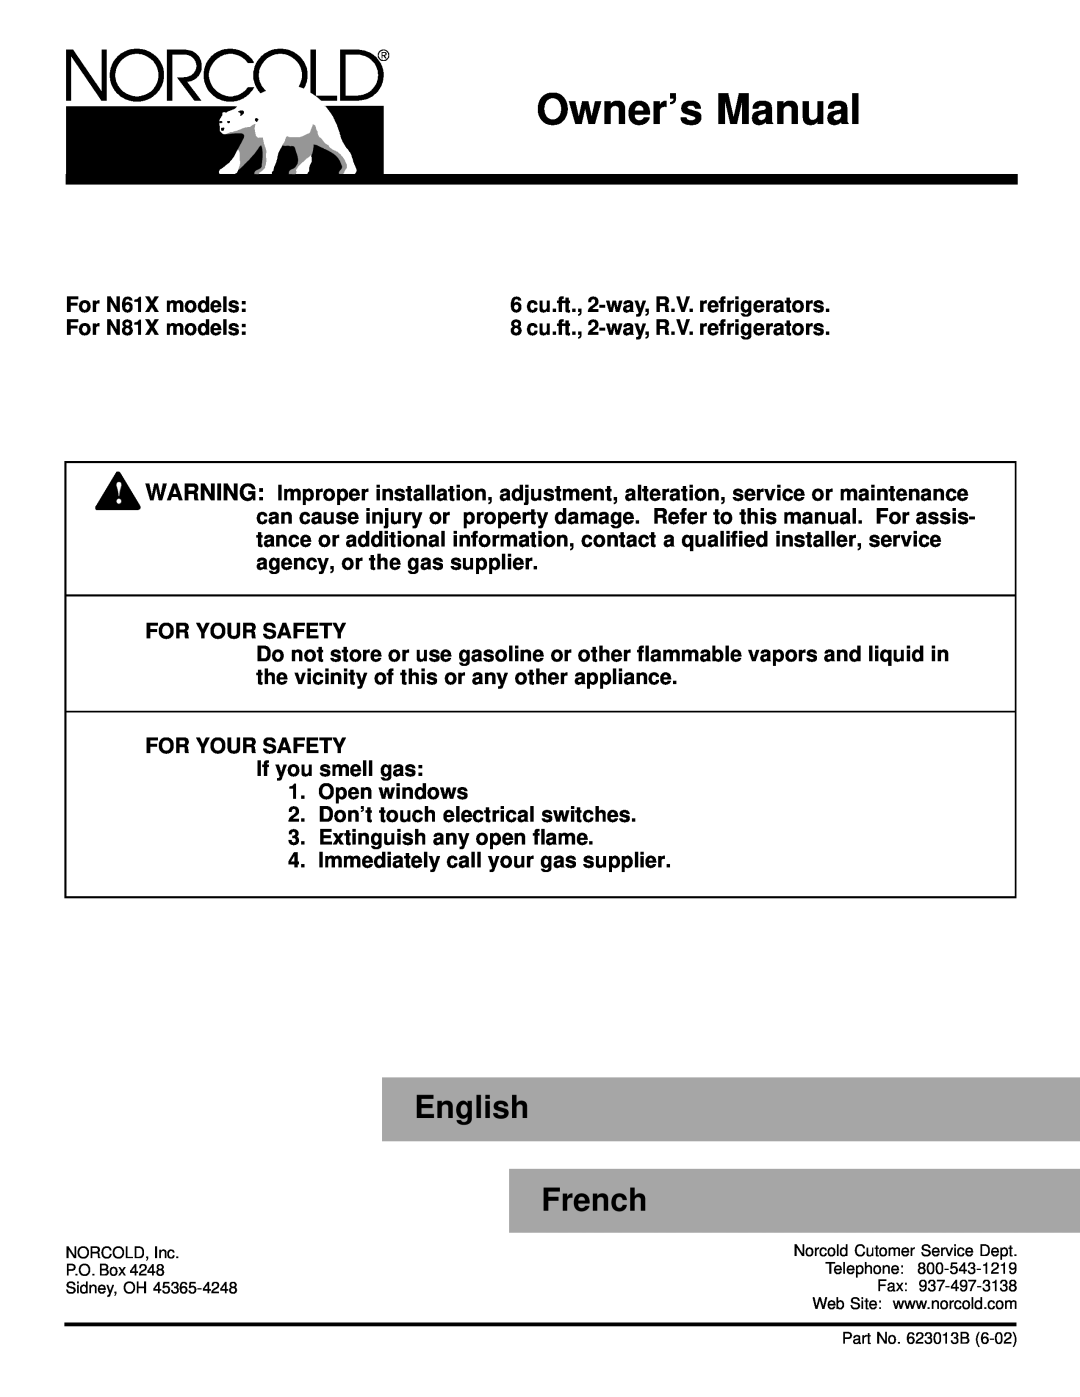 Norcold N61X, N81X owner manual English, French 